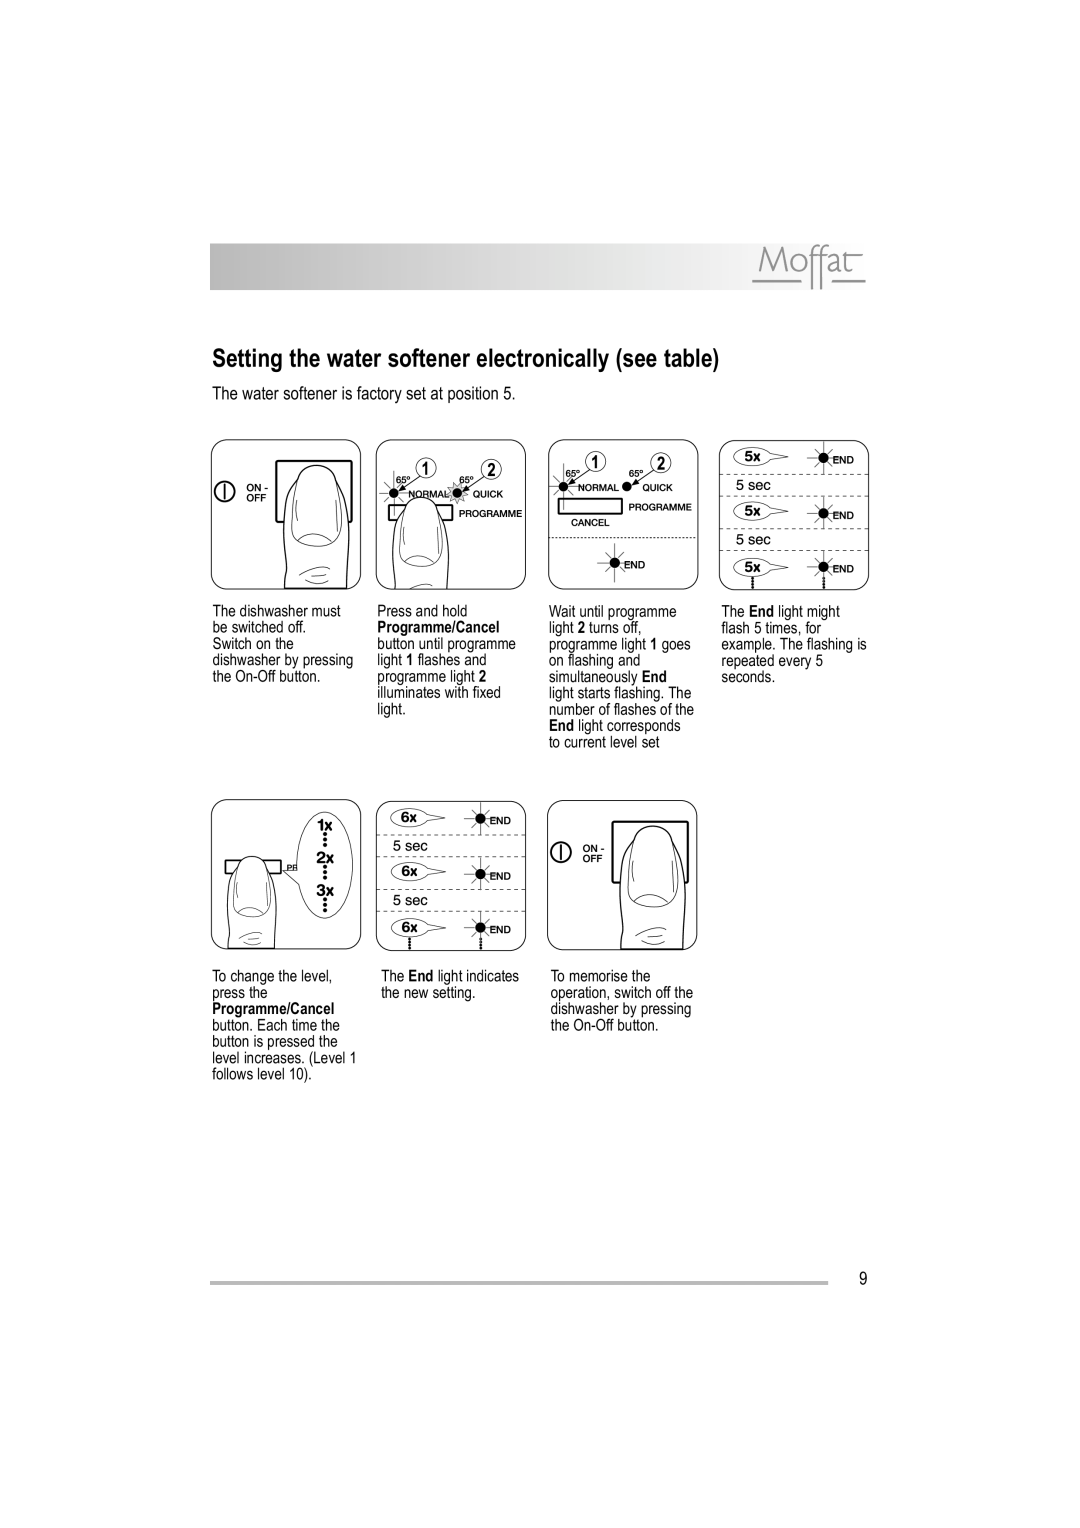 Moffat MDW 542 user manual Setting the water softener electronically see table, Programme/Cancel, Wait until programme 